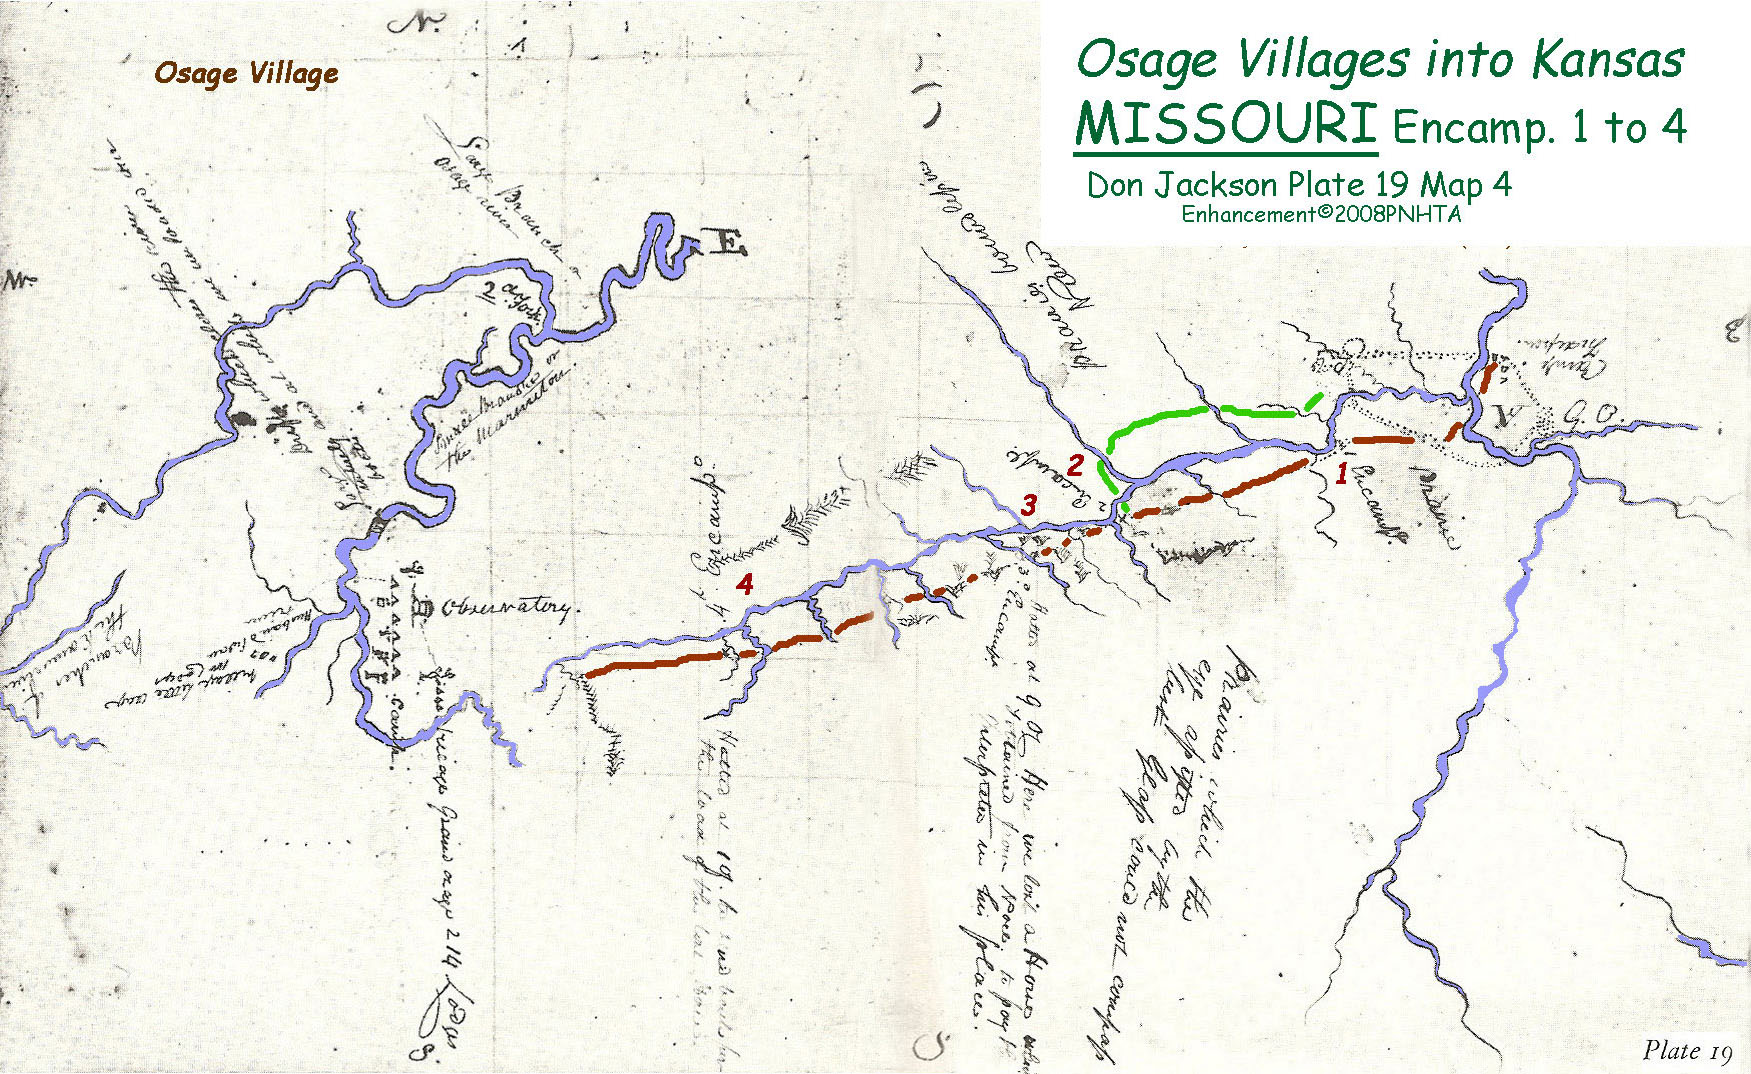 Map 4 (Field 19)- Approaching the Osage Villages (Jackson Plate 19)